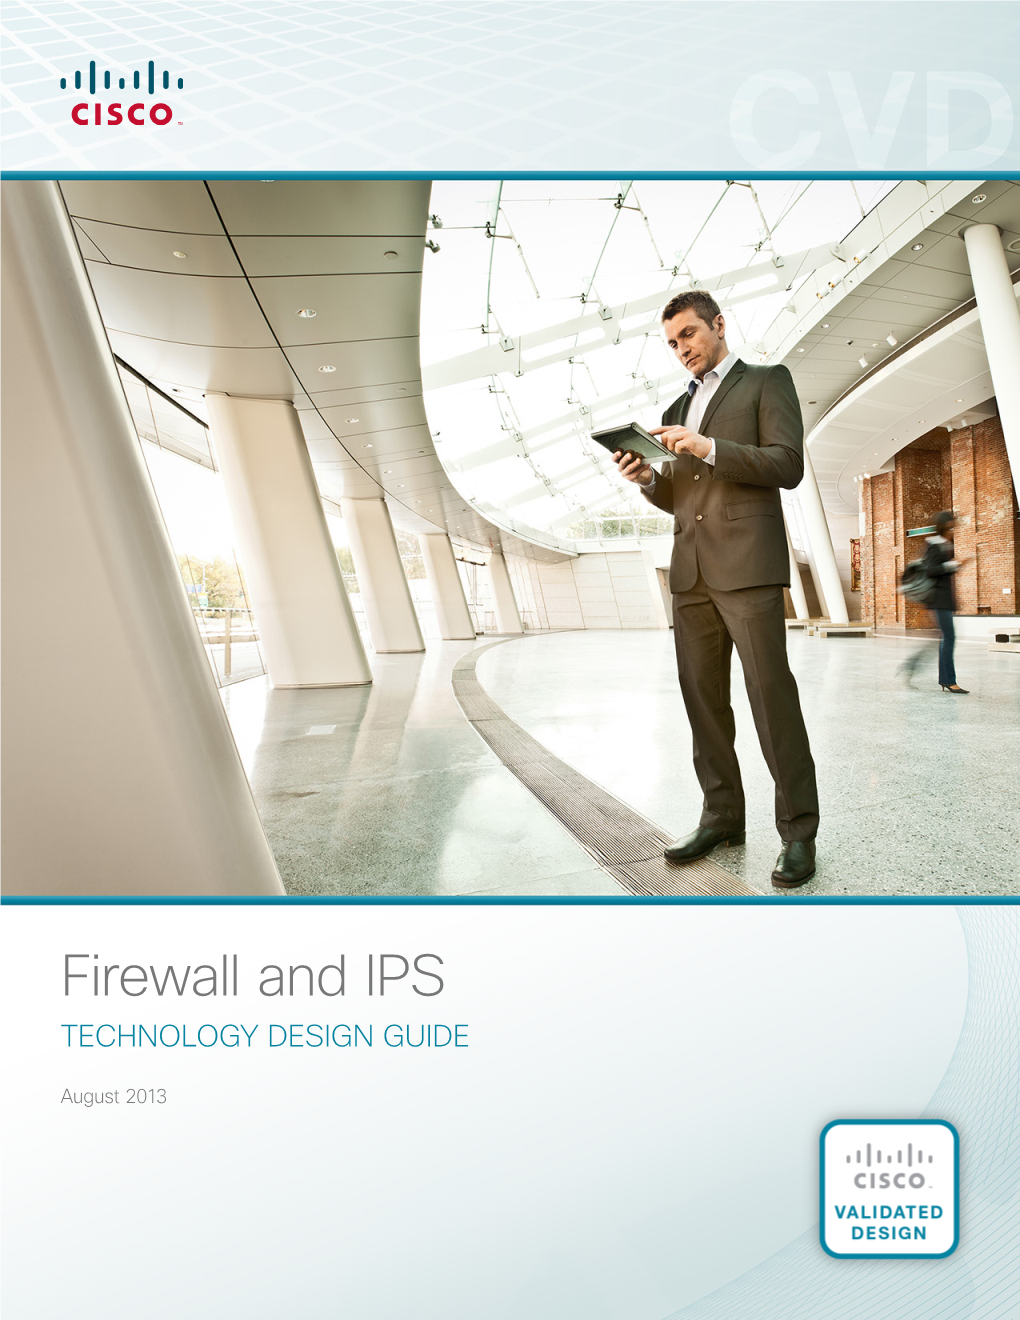 Firewall and IPS TECHNOLOGY DESIGN GUIDE